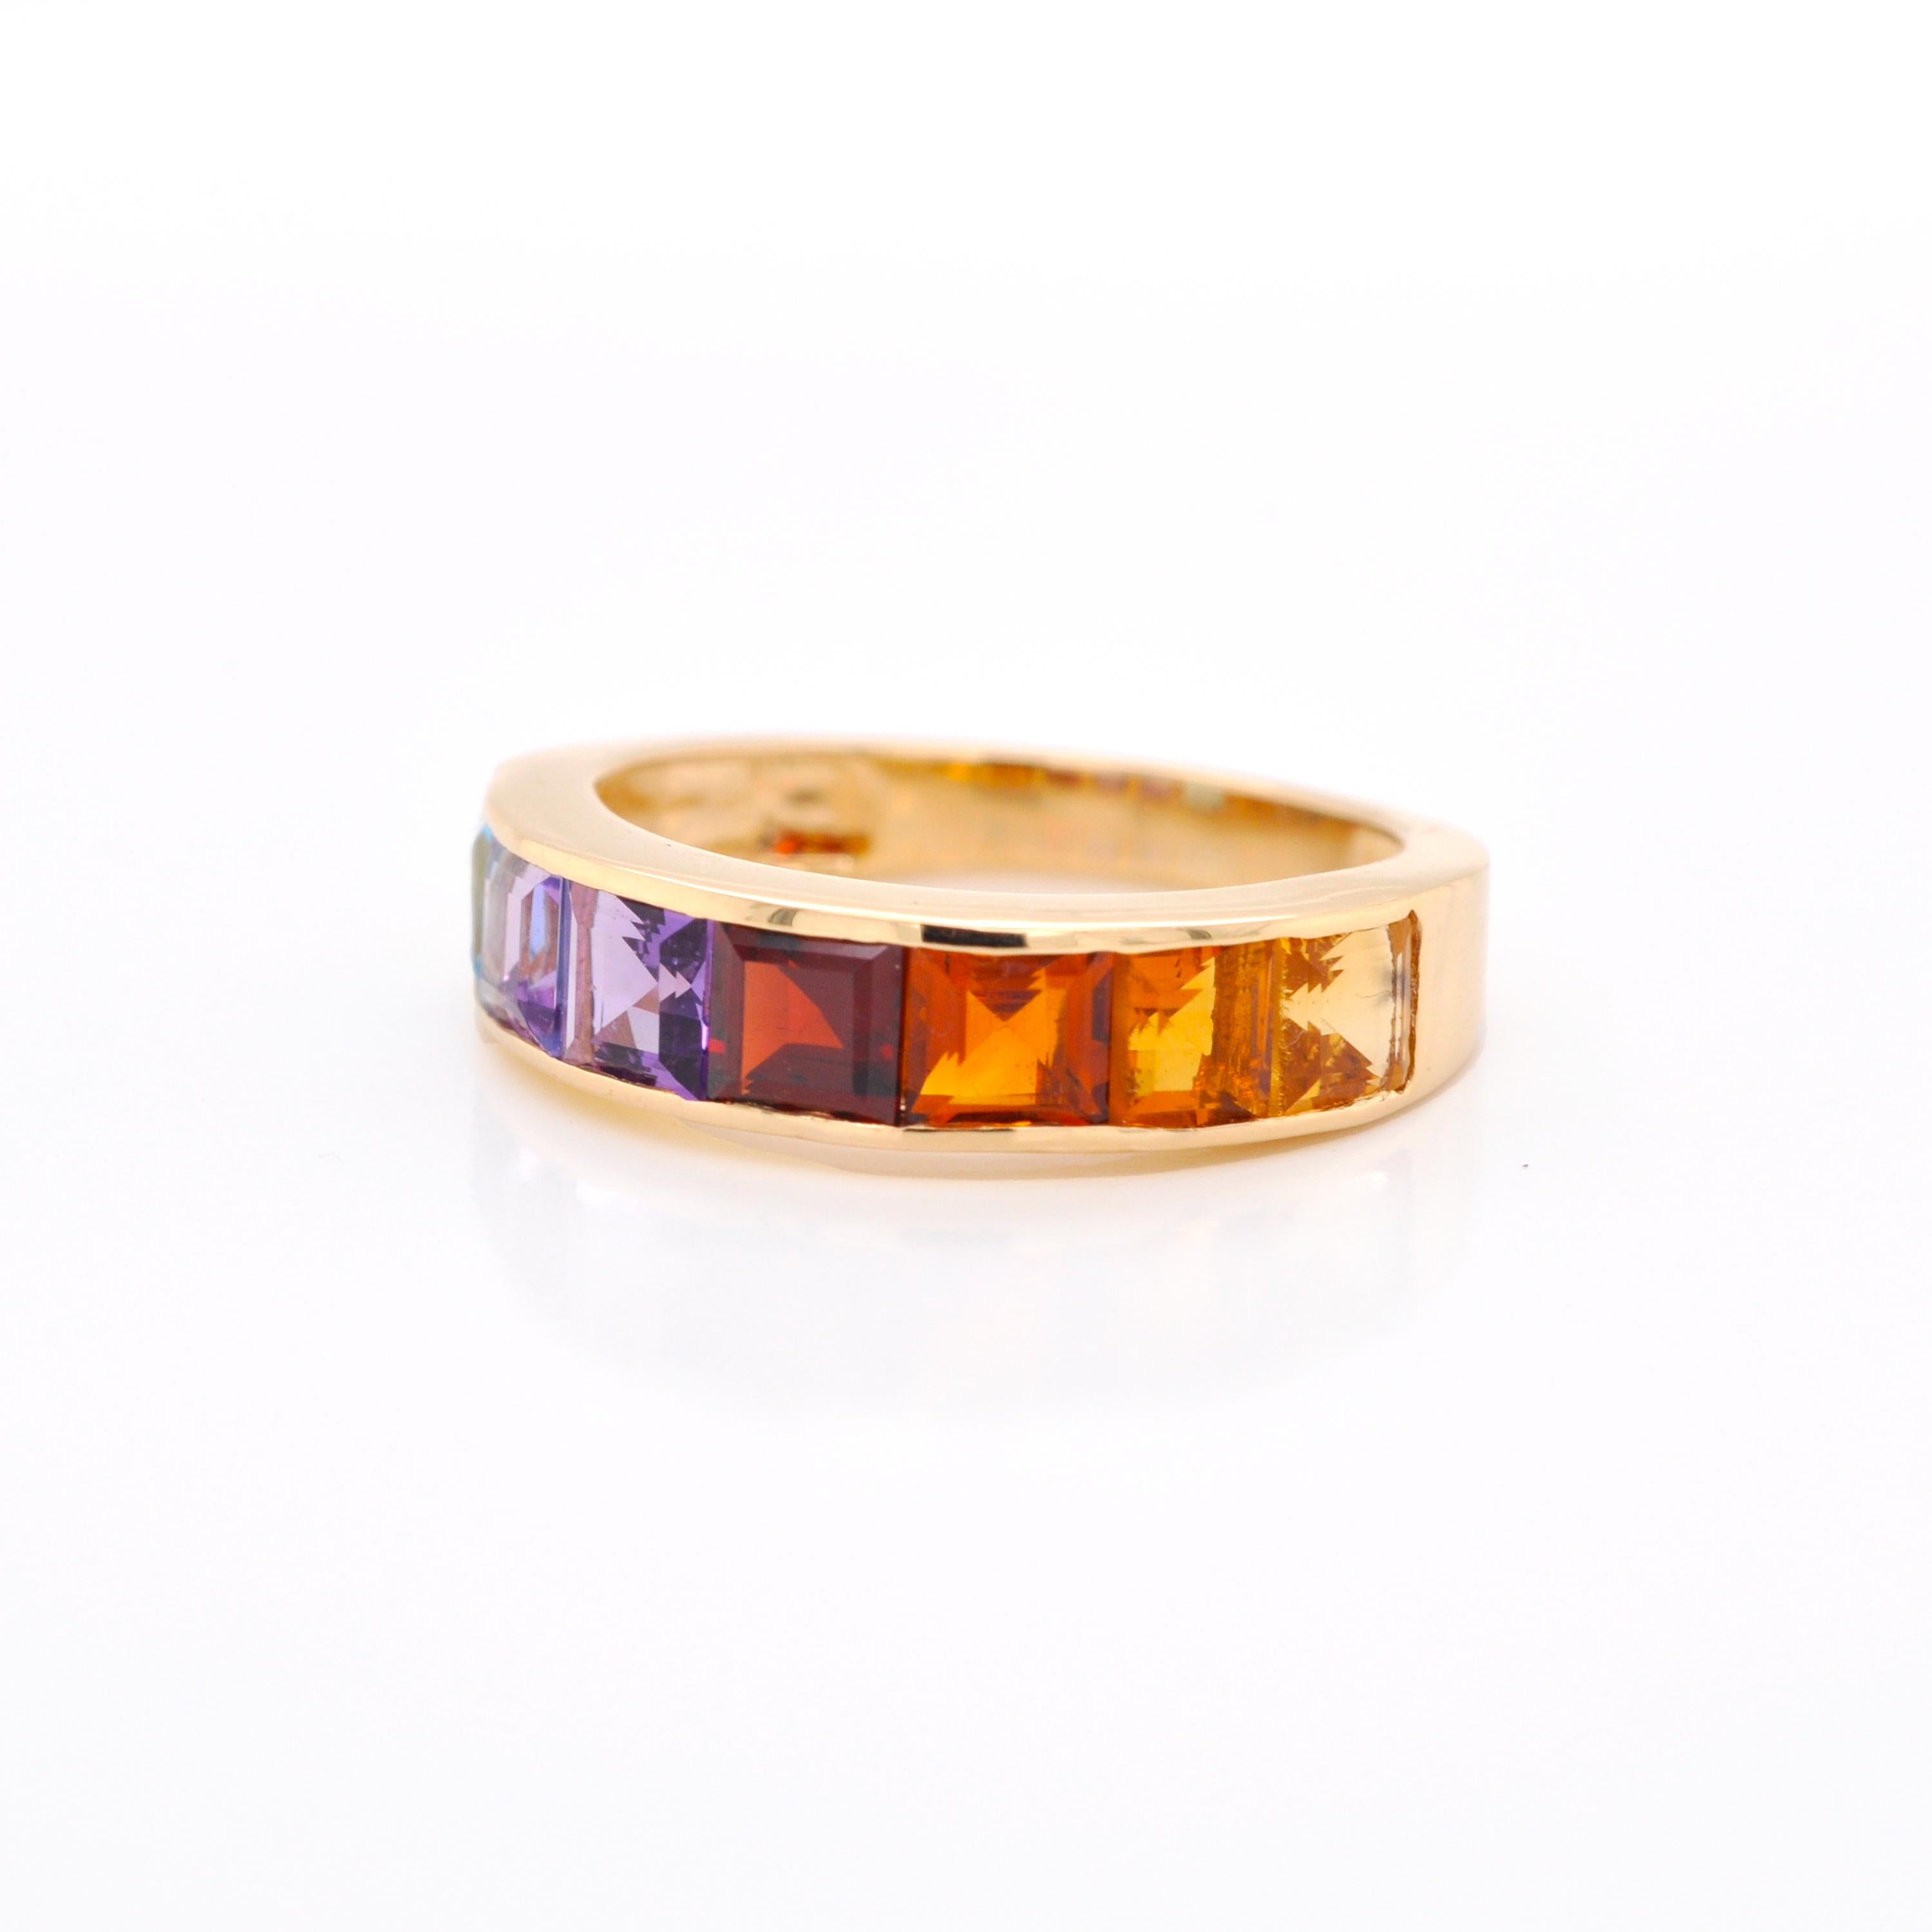 For Sale:  18K Gold Channel-Set 4 MM Square Rainbow Gemstones Eternity Half Band Ring 4